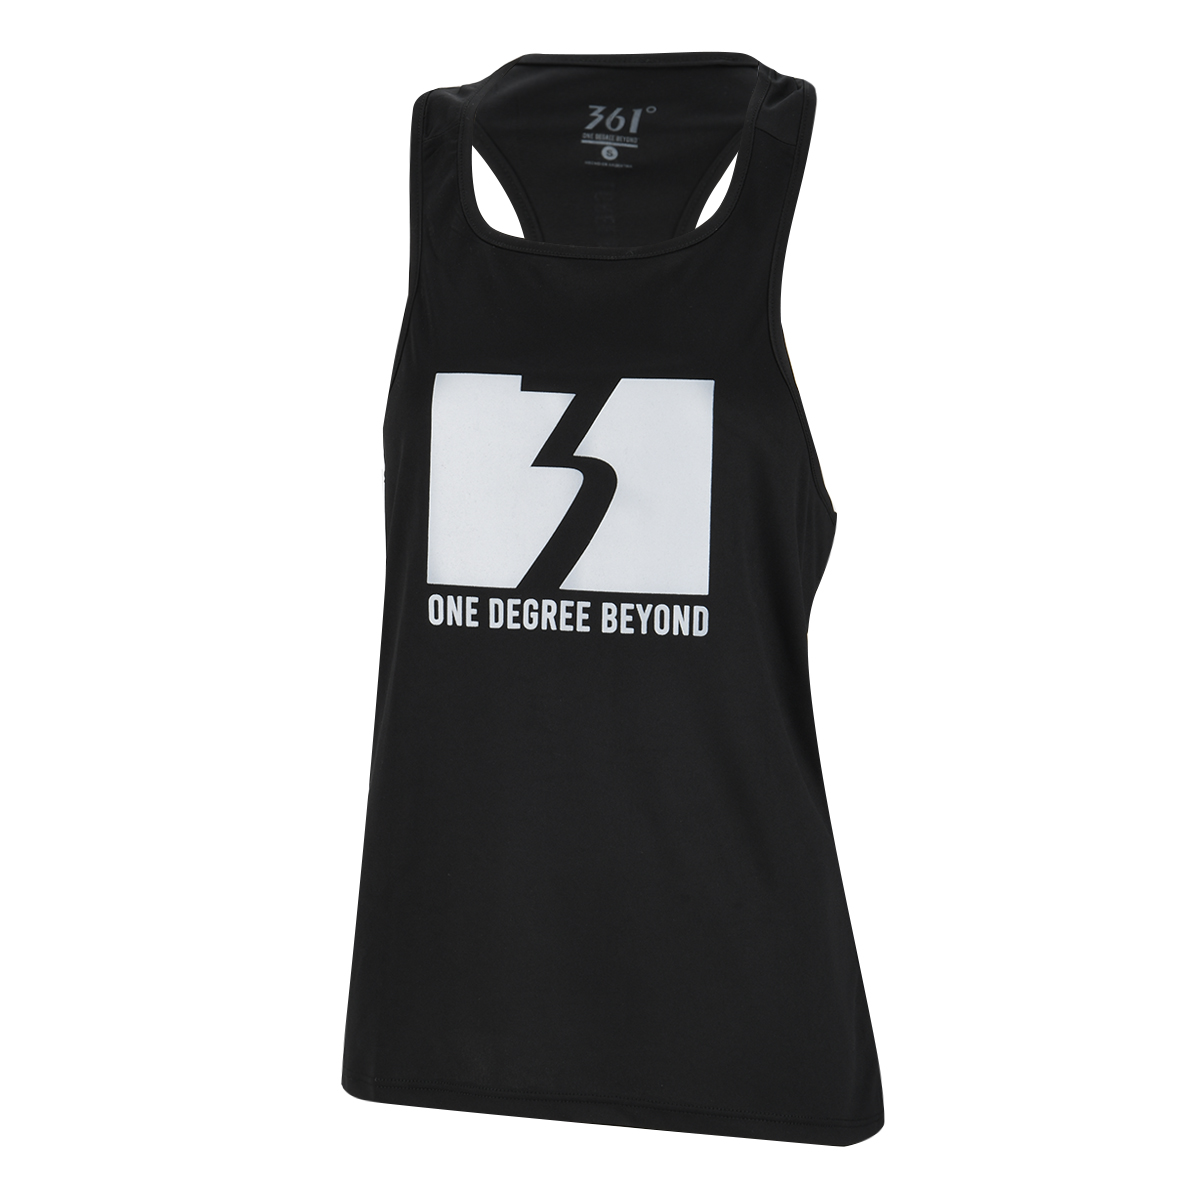 Musculosa Entrenamiento 361 Classic Mujer,  image number null